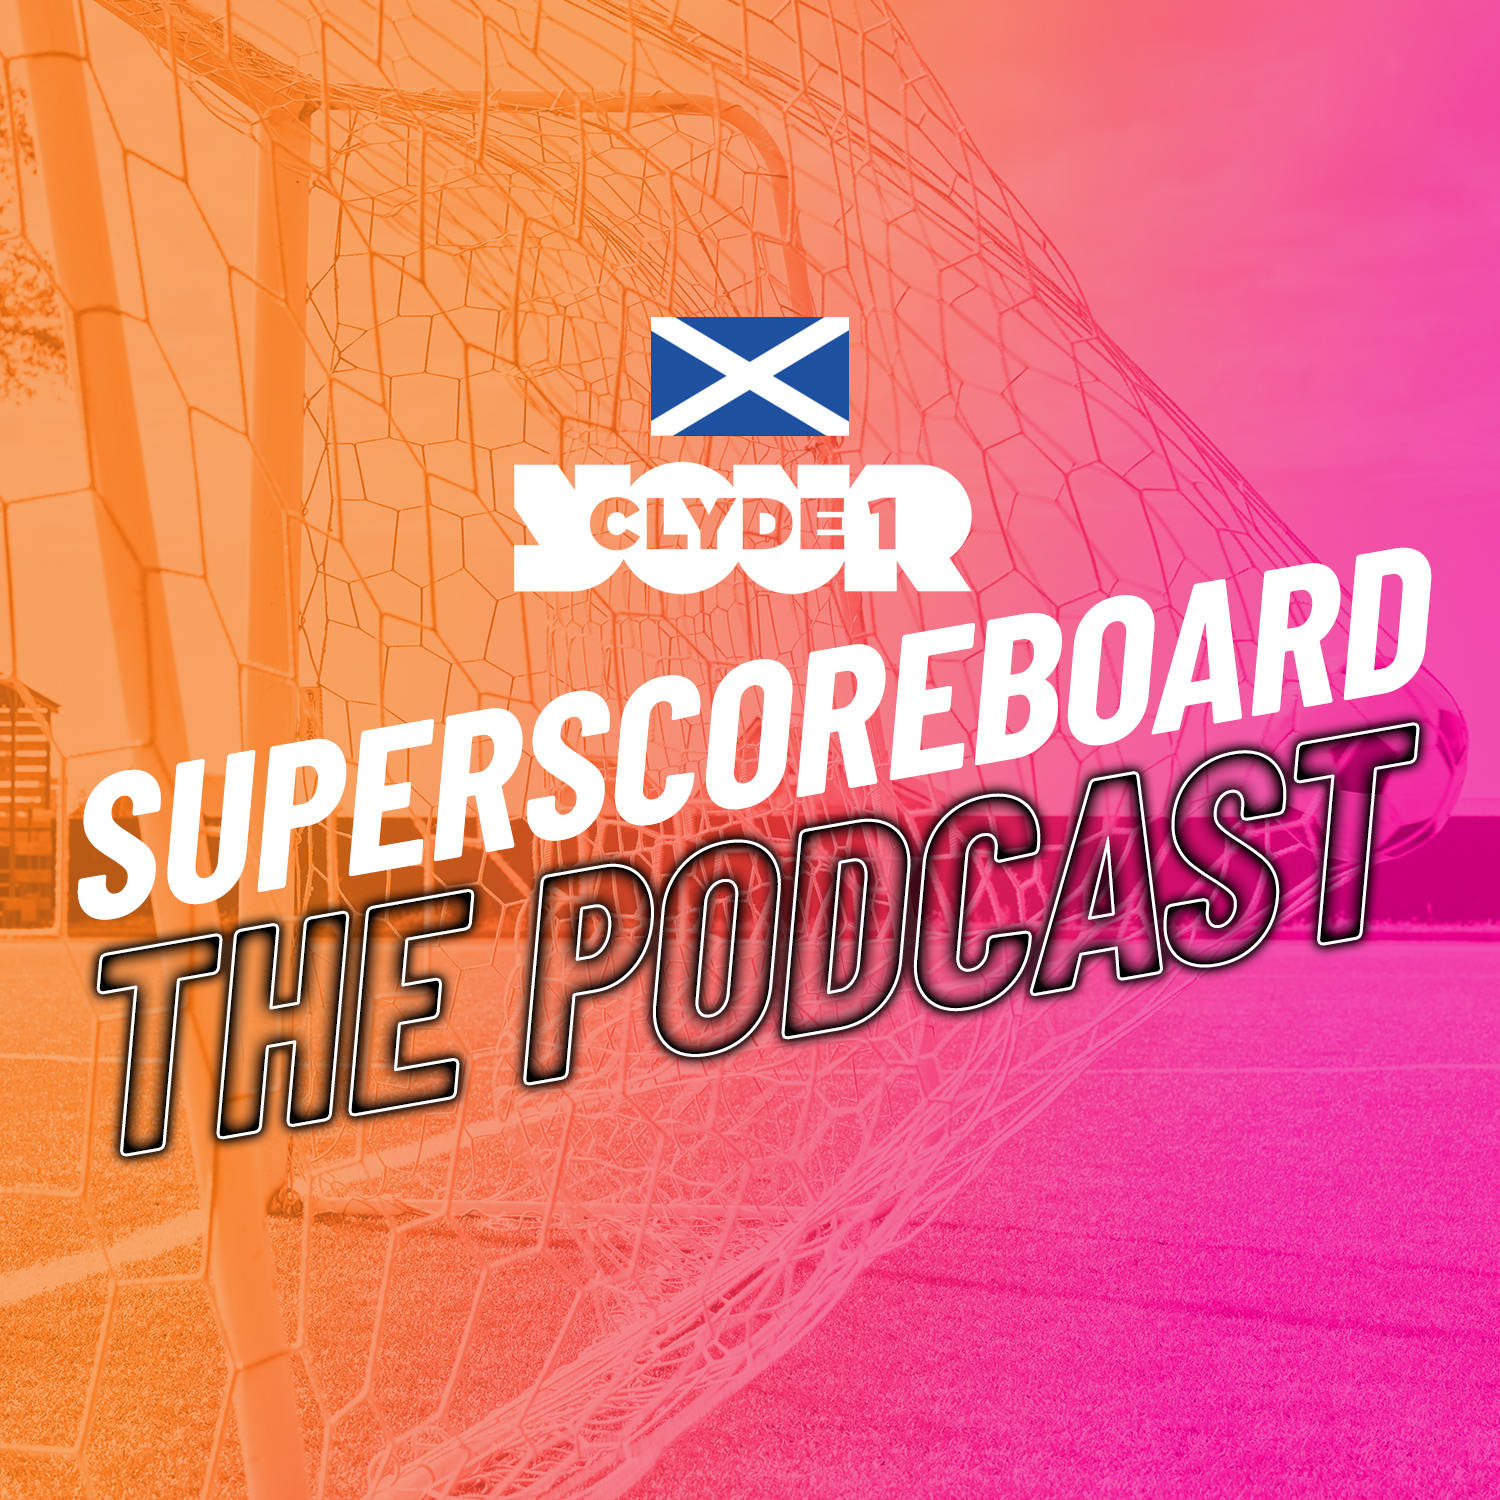 Wednesday 20th March Clyde 1 Superscoreboard